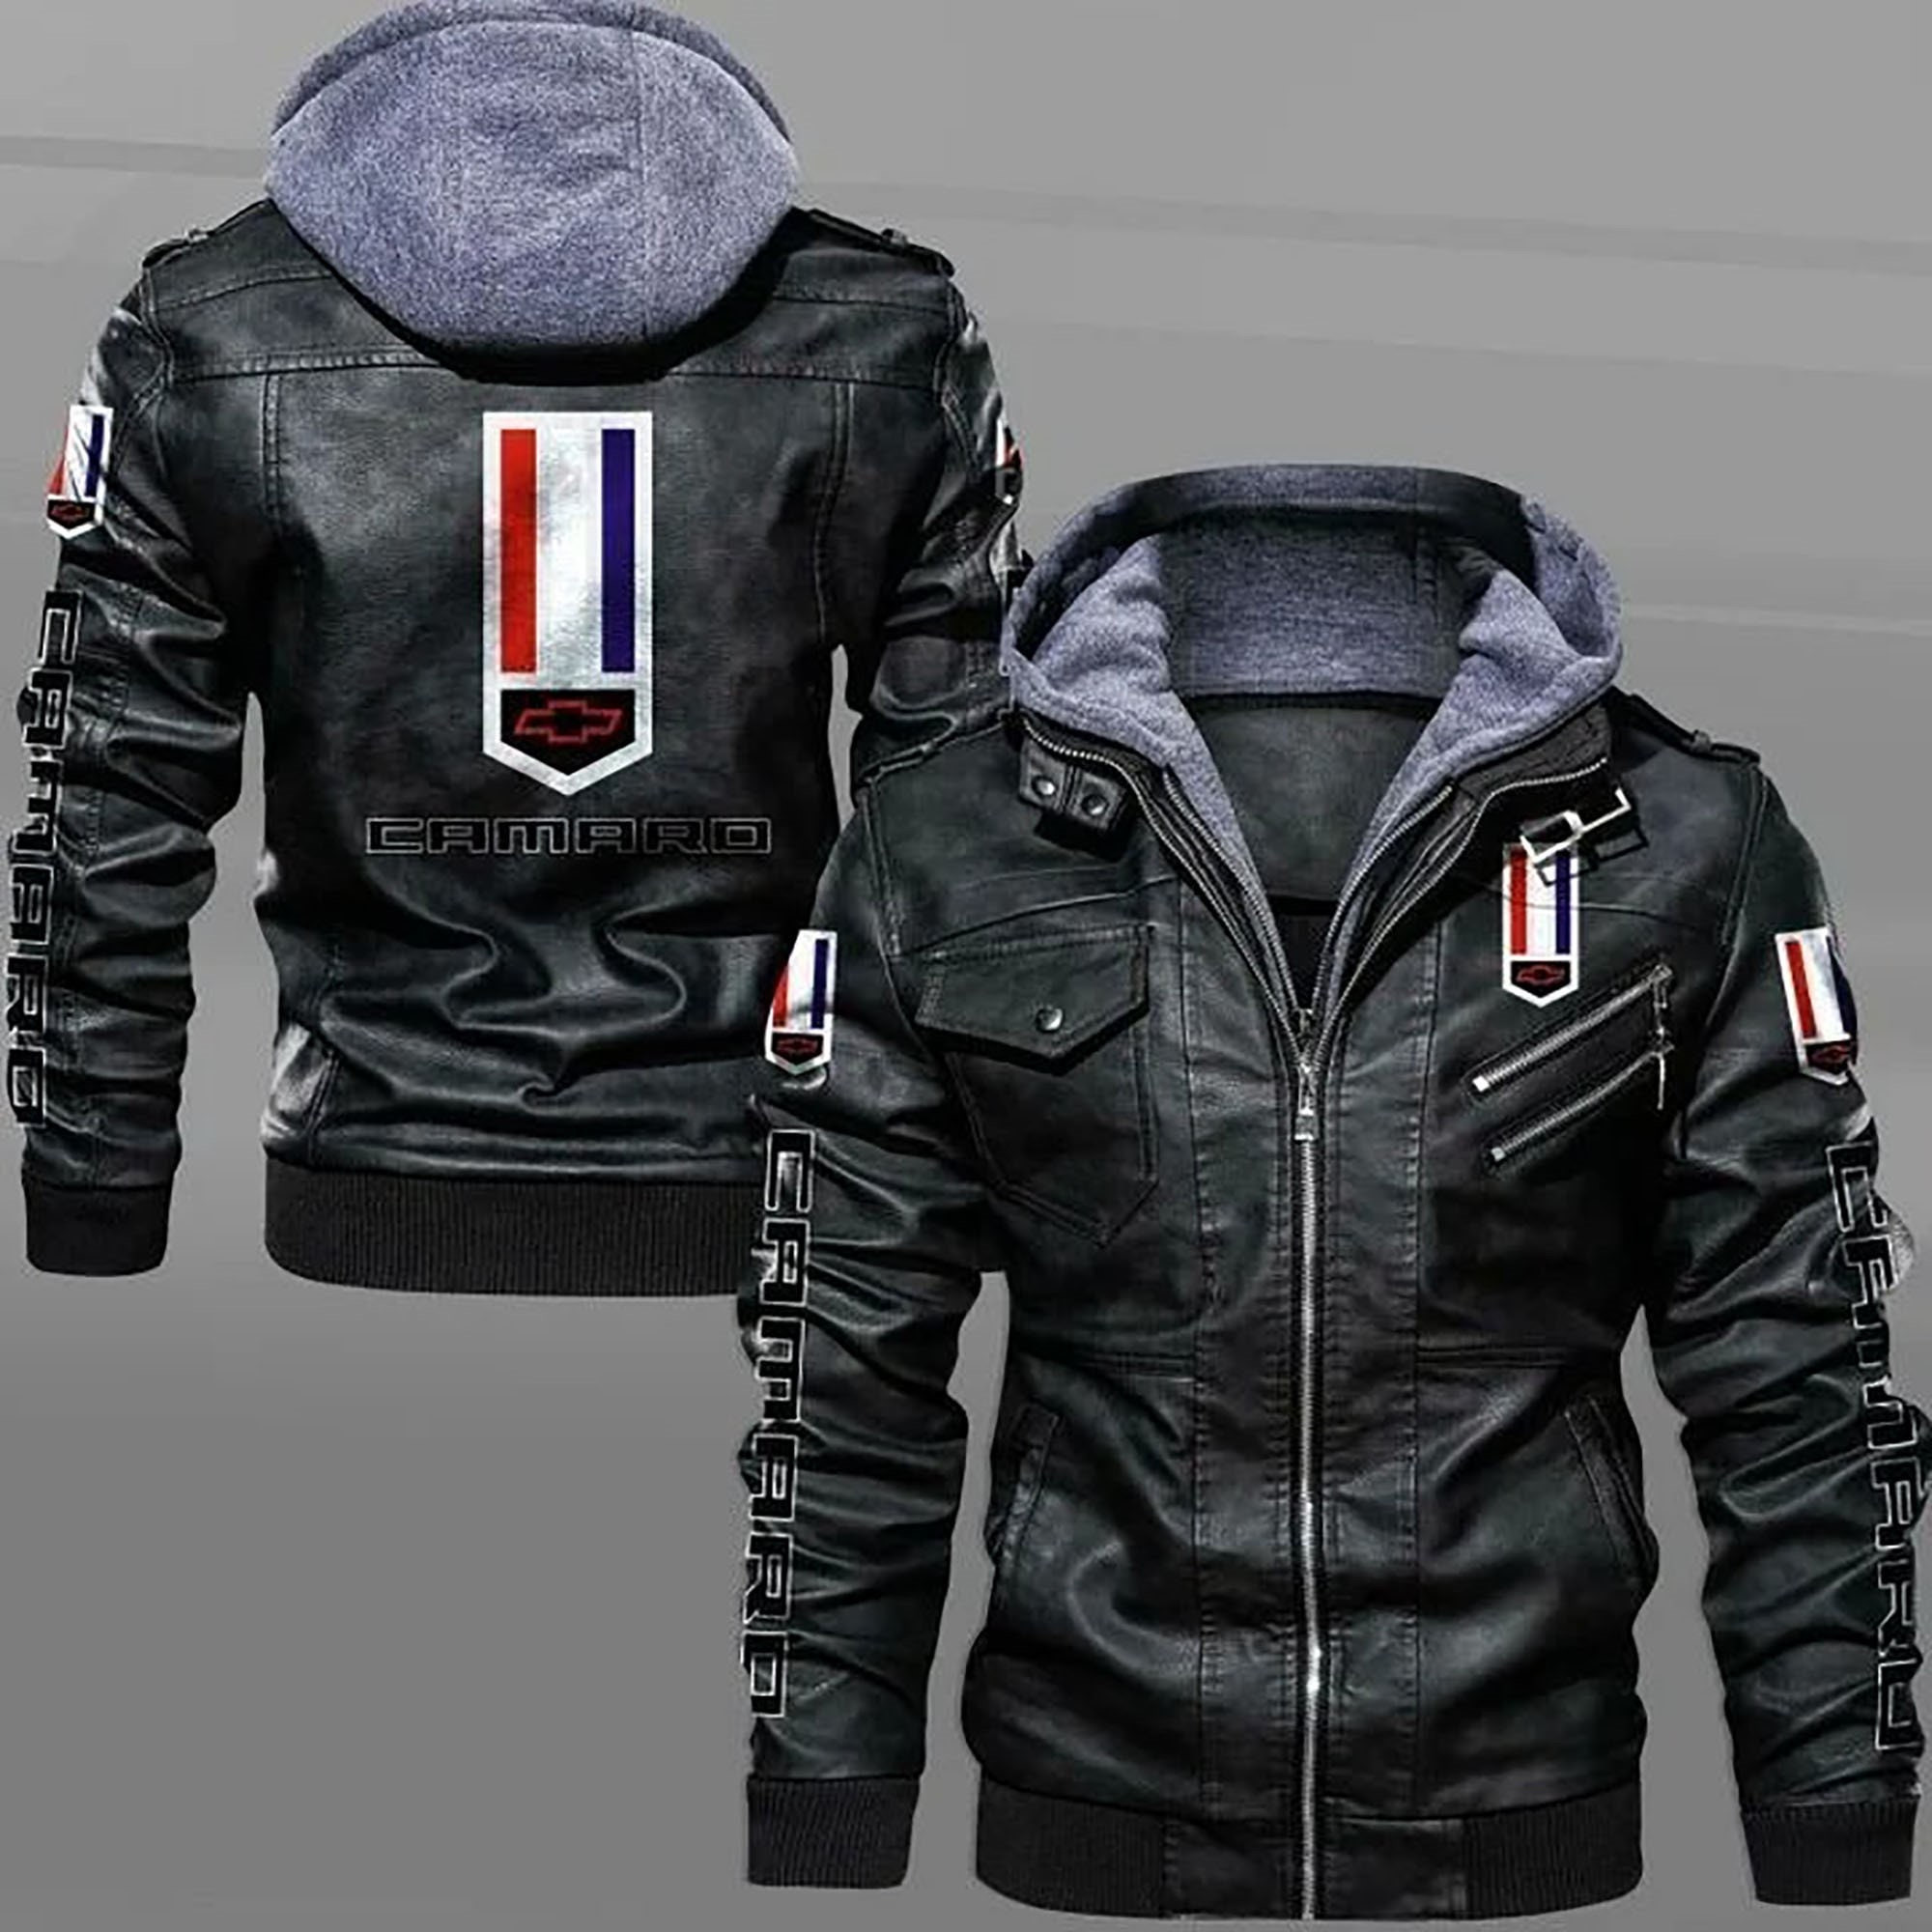 These Amazing Leather Jacket will add to the appeal of your outfit 219